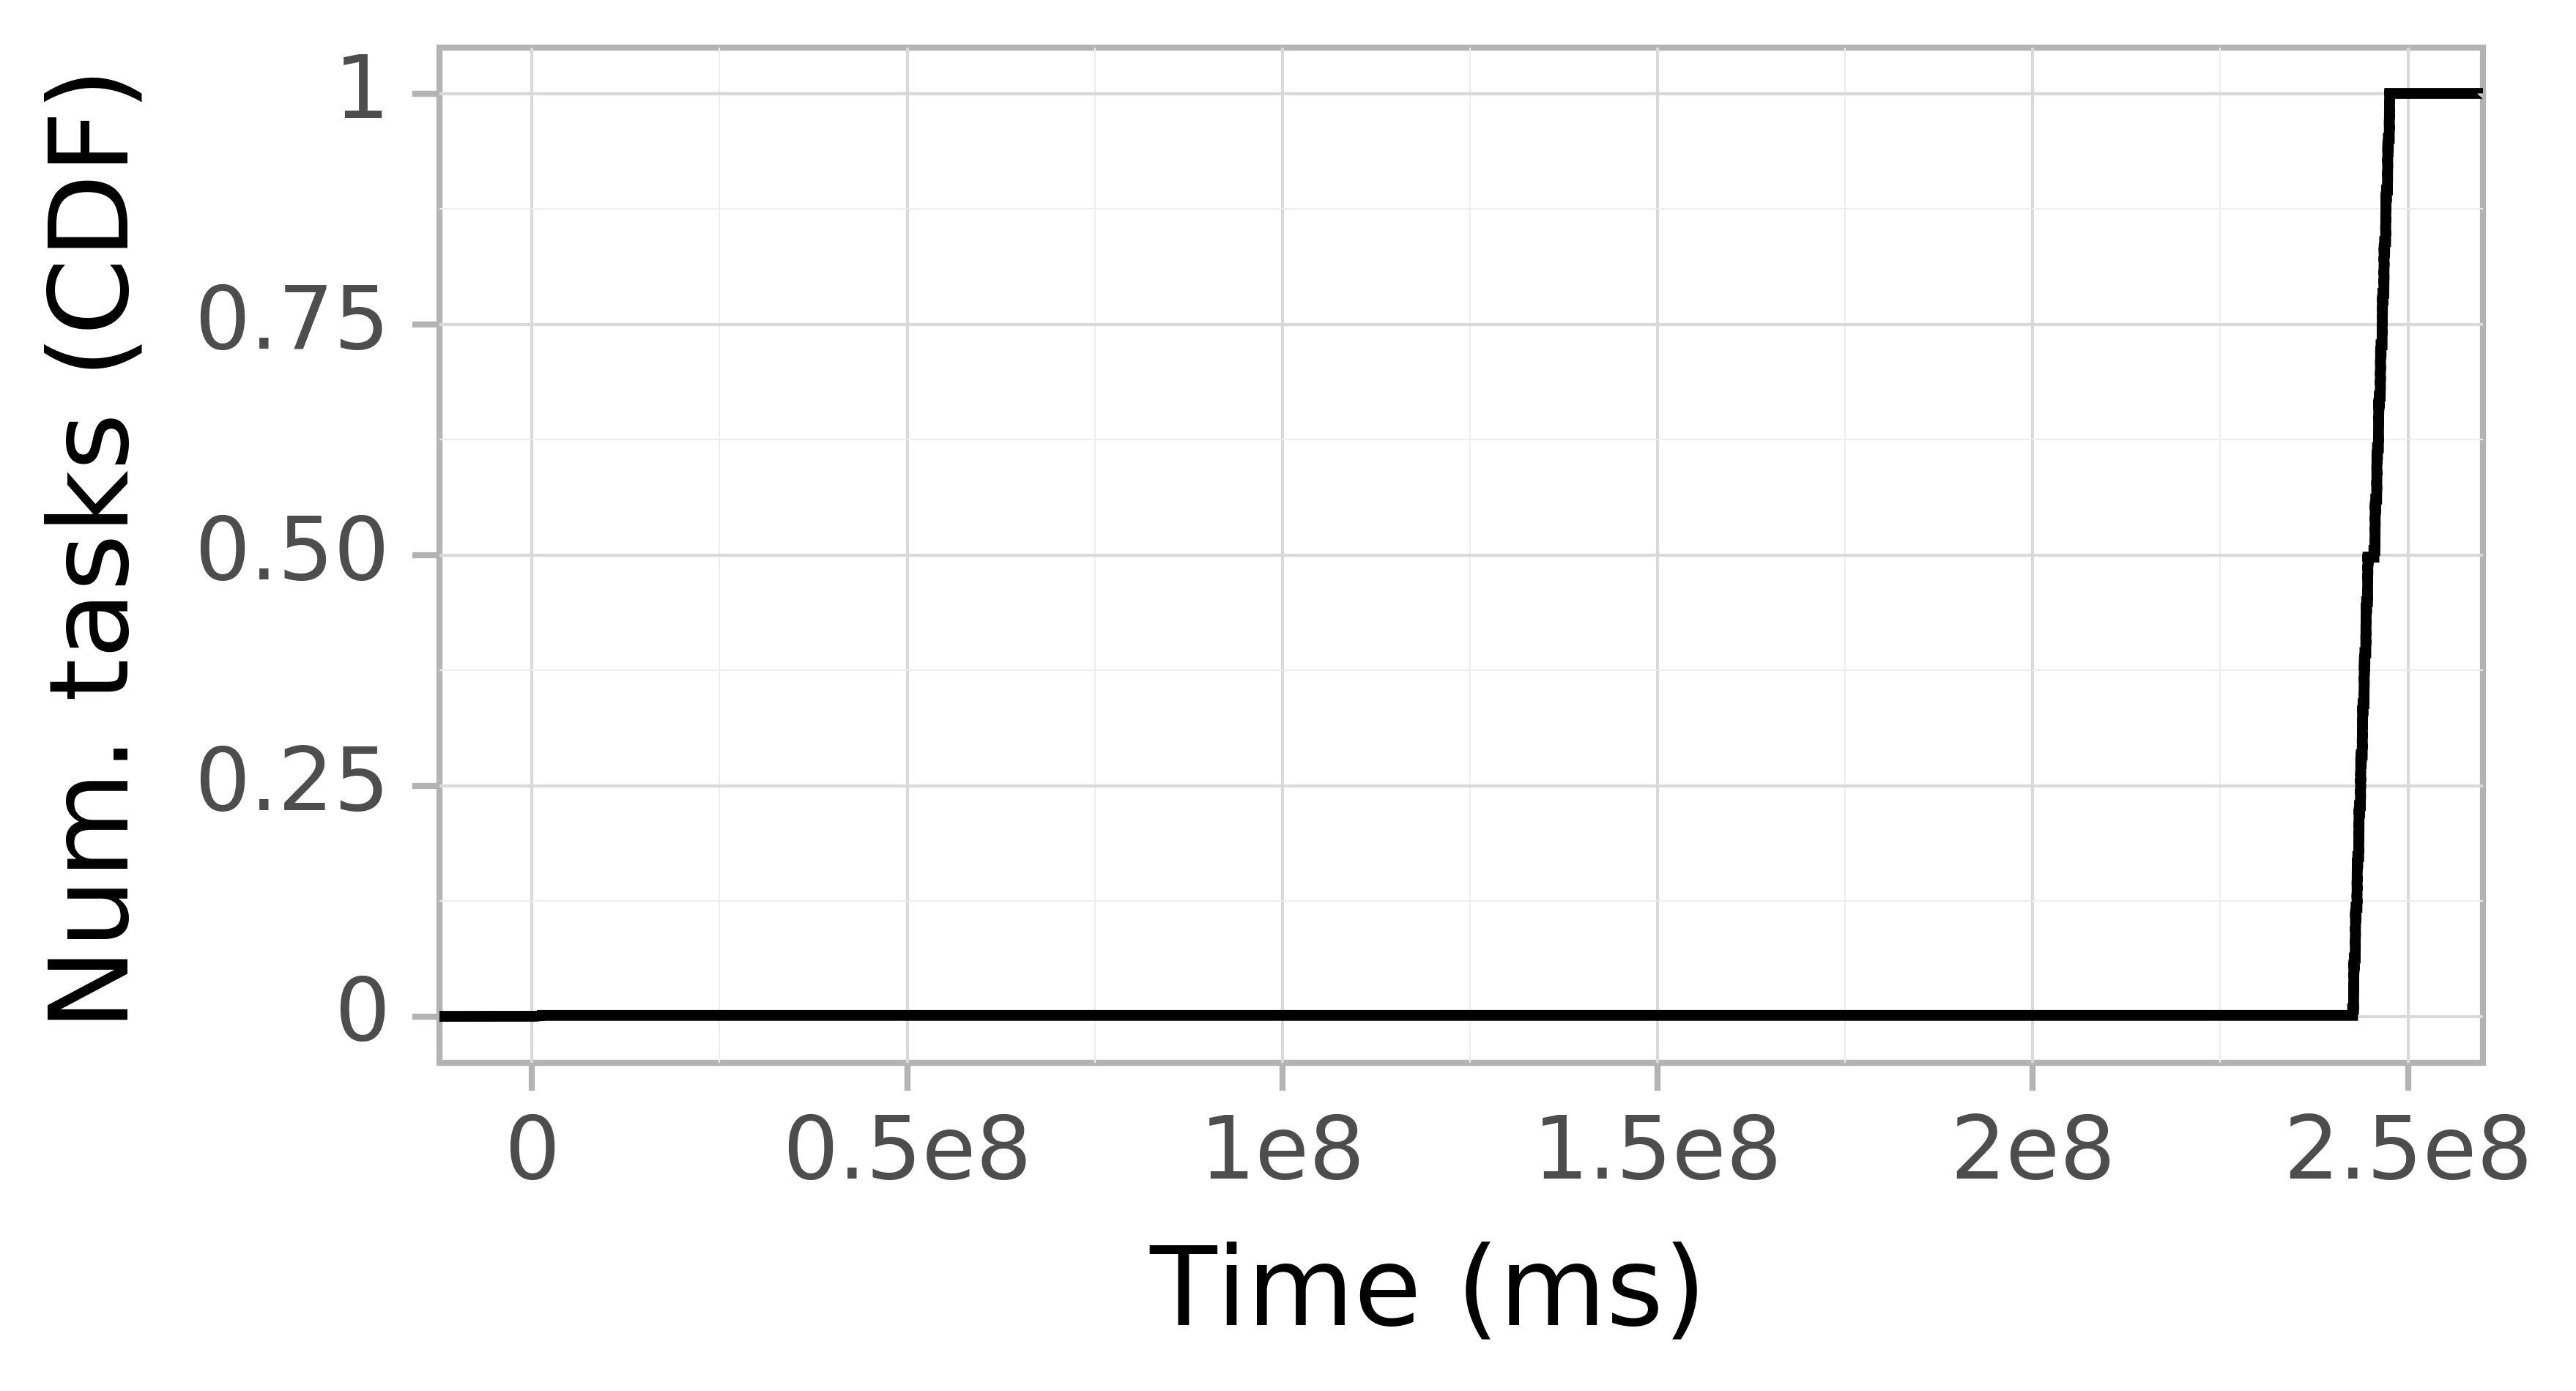 Task arrival CDF graph for the askalon-new_ee33 trace.